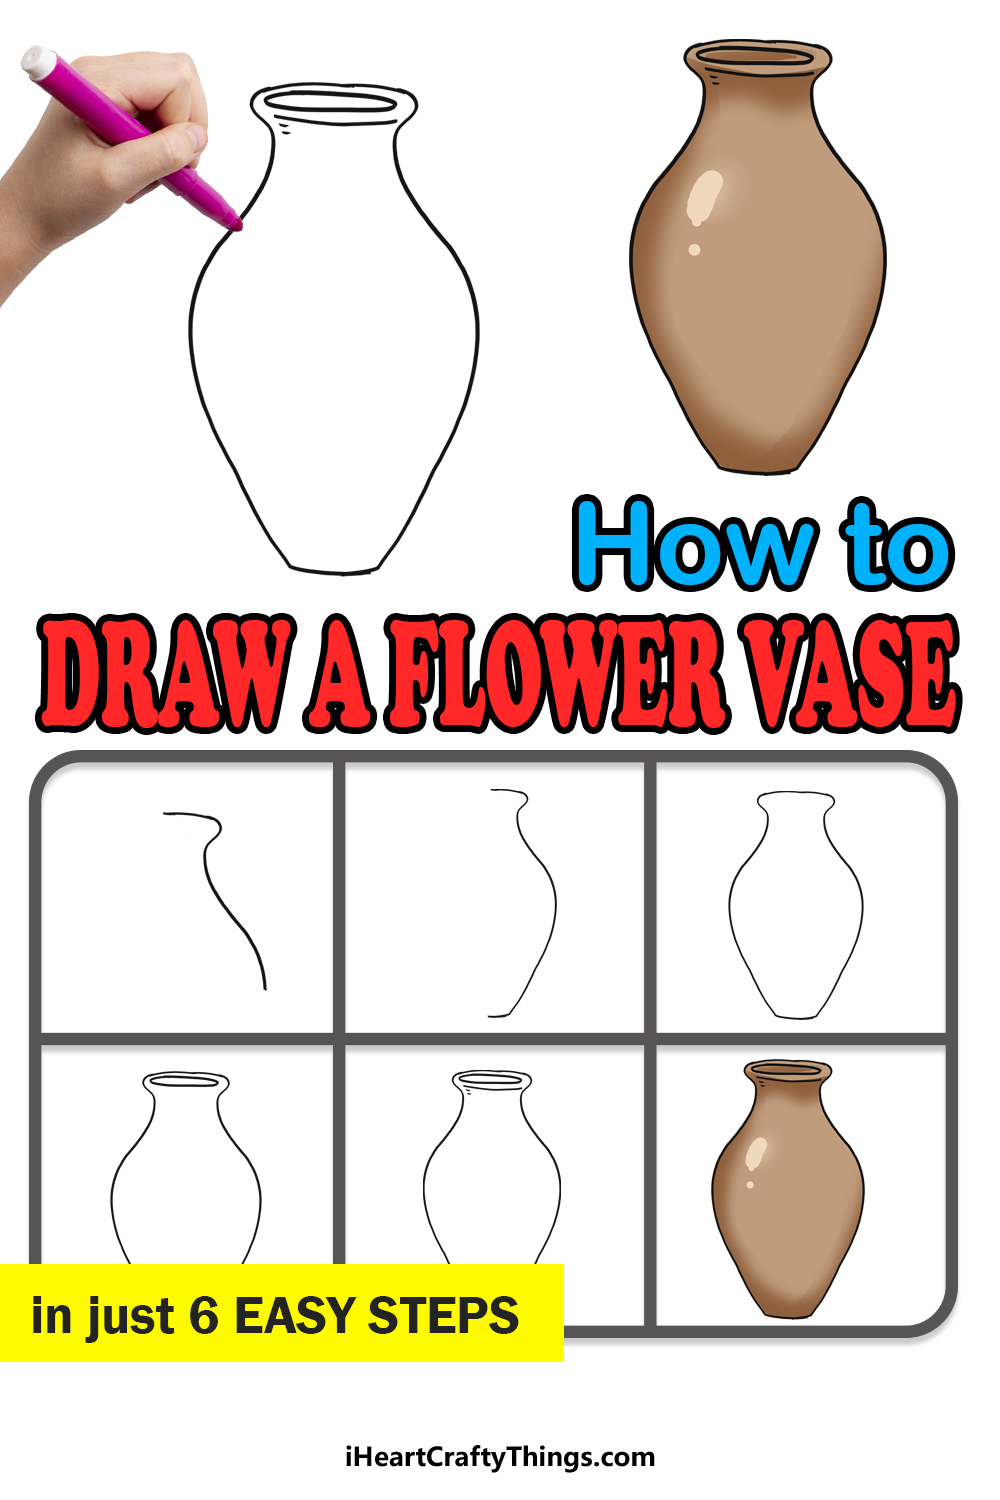 How to Draw A Flower Vase step by step guide